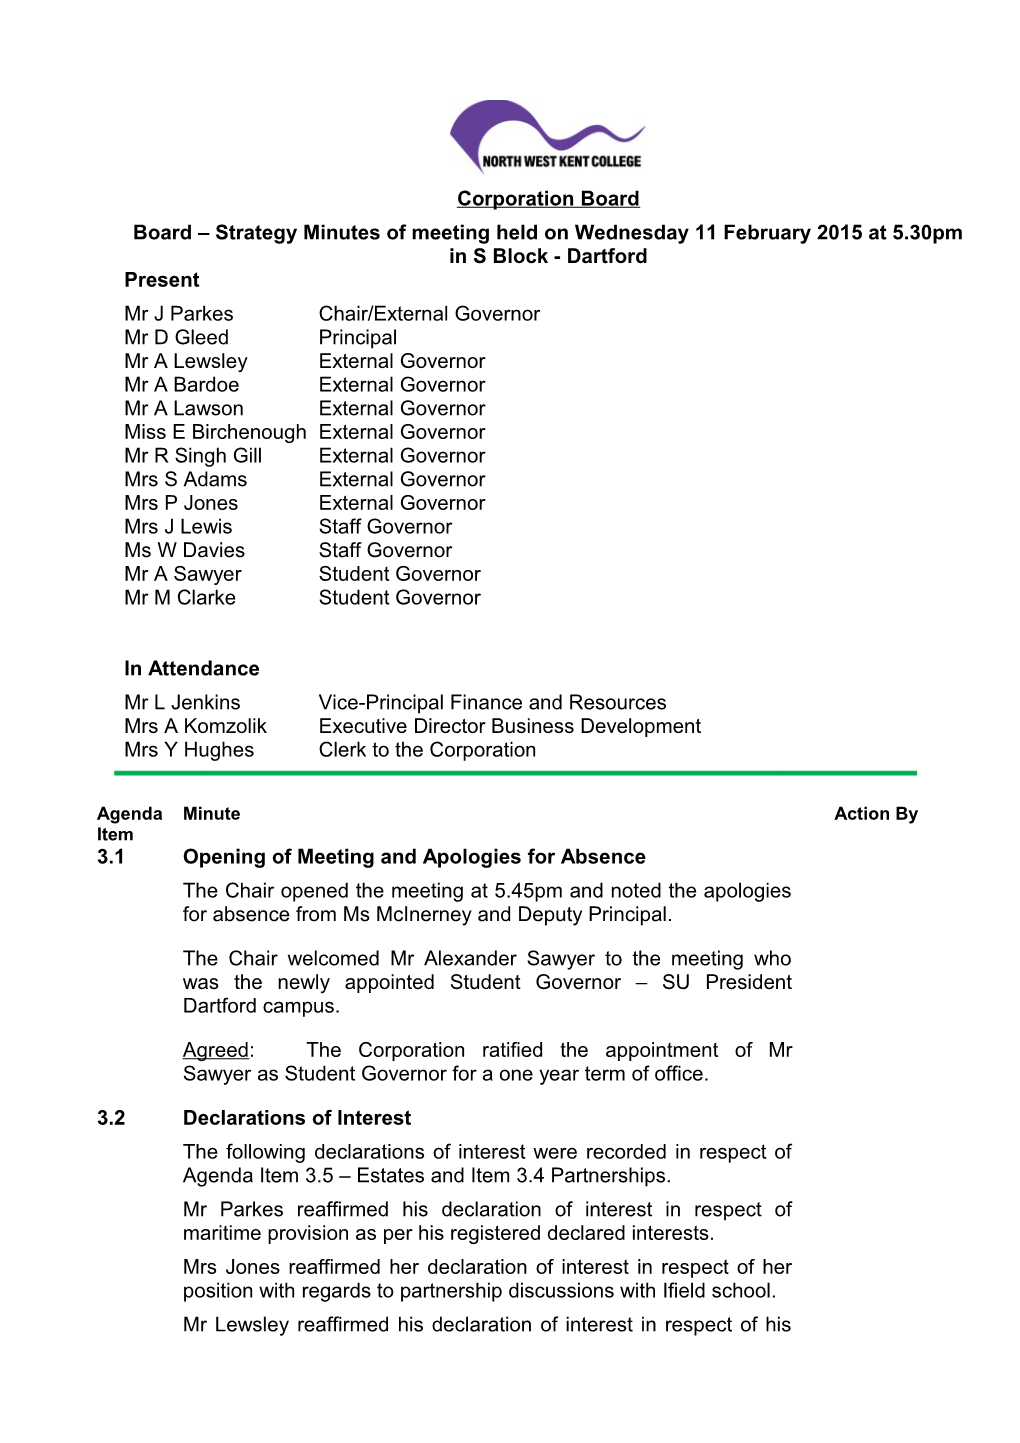 Board Strategy Minutes of Meeting Held on Wednesday 11 February 2015 at 5.30Pm